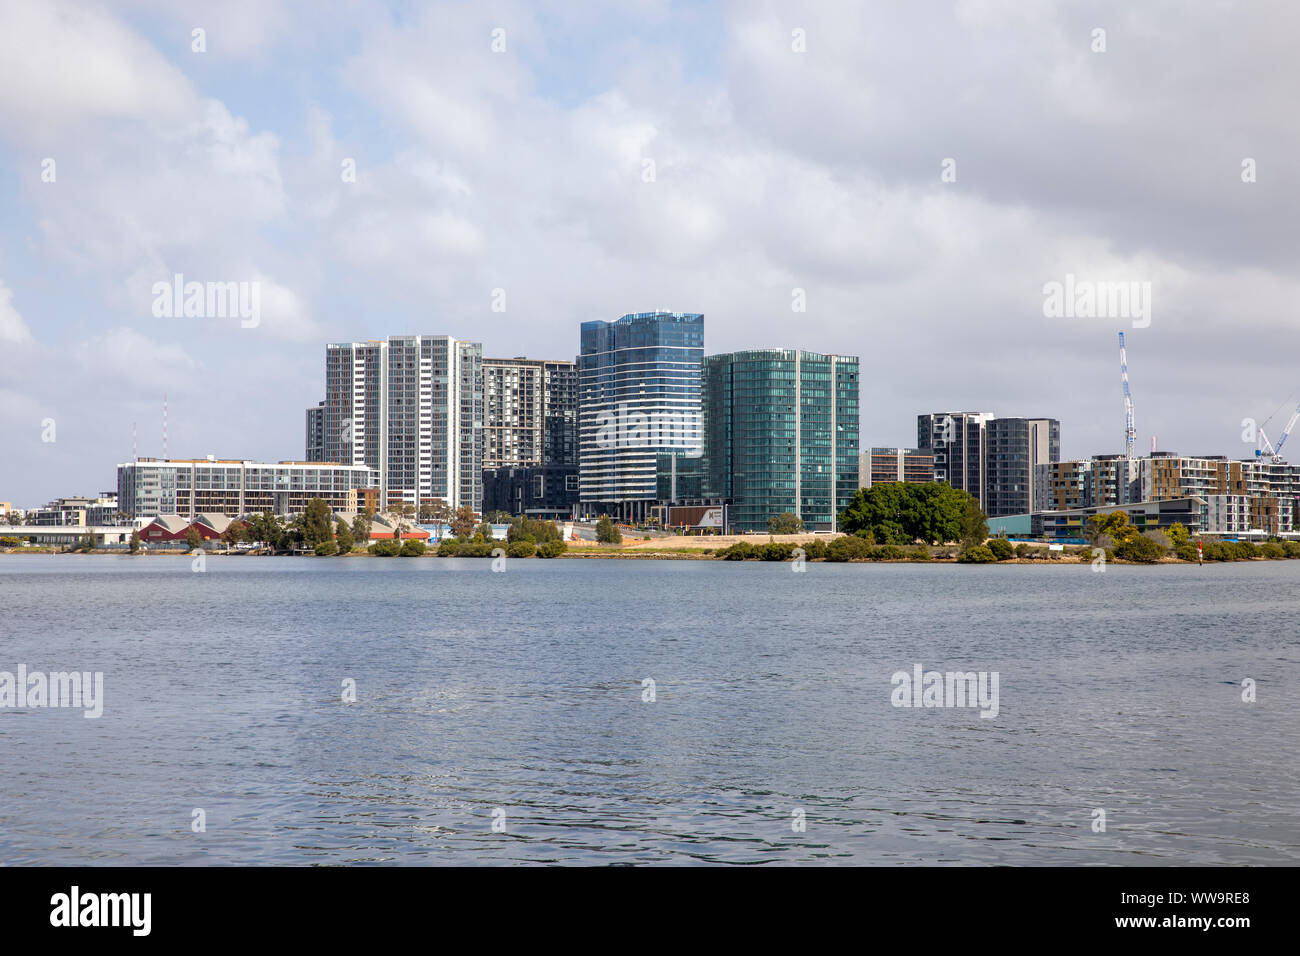 Wentworth Point Sydney, high rise apartment buildings in this sydney suburb,Australia Stock Photo